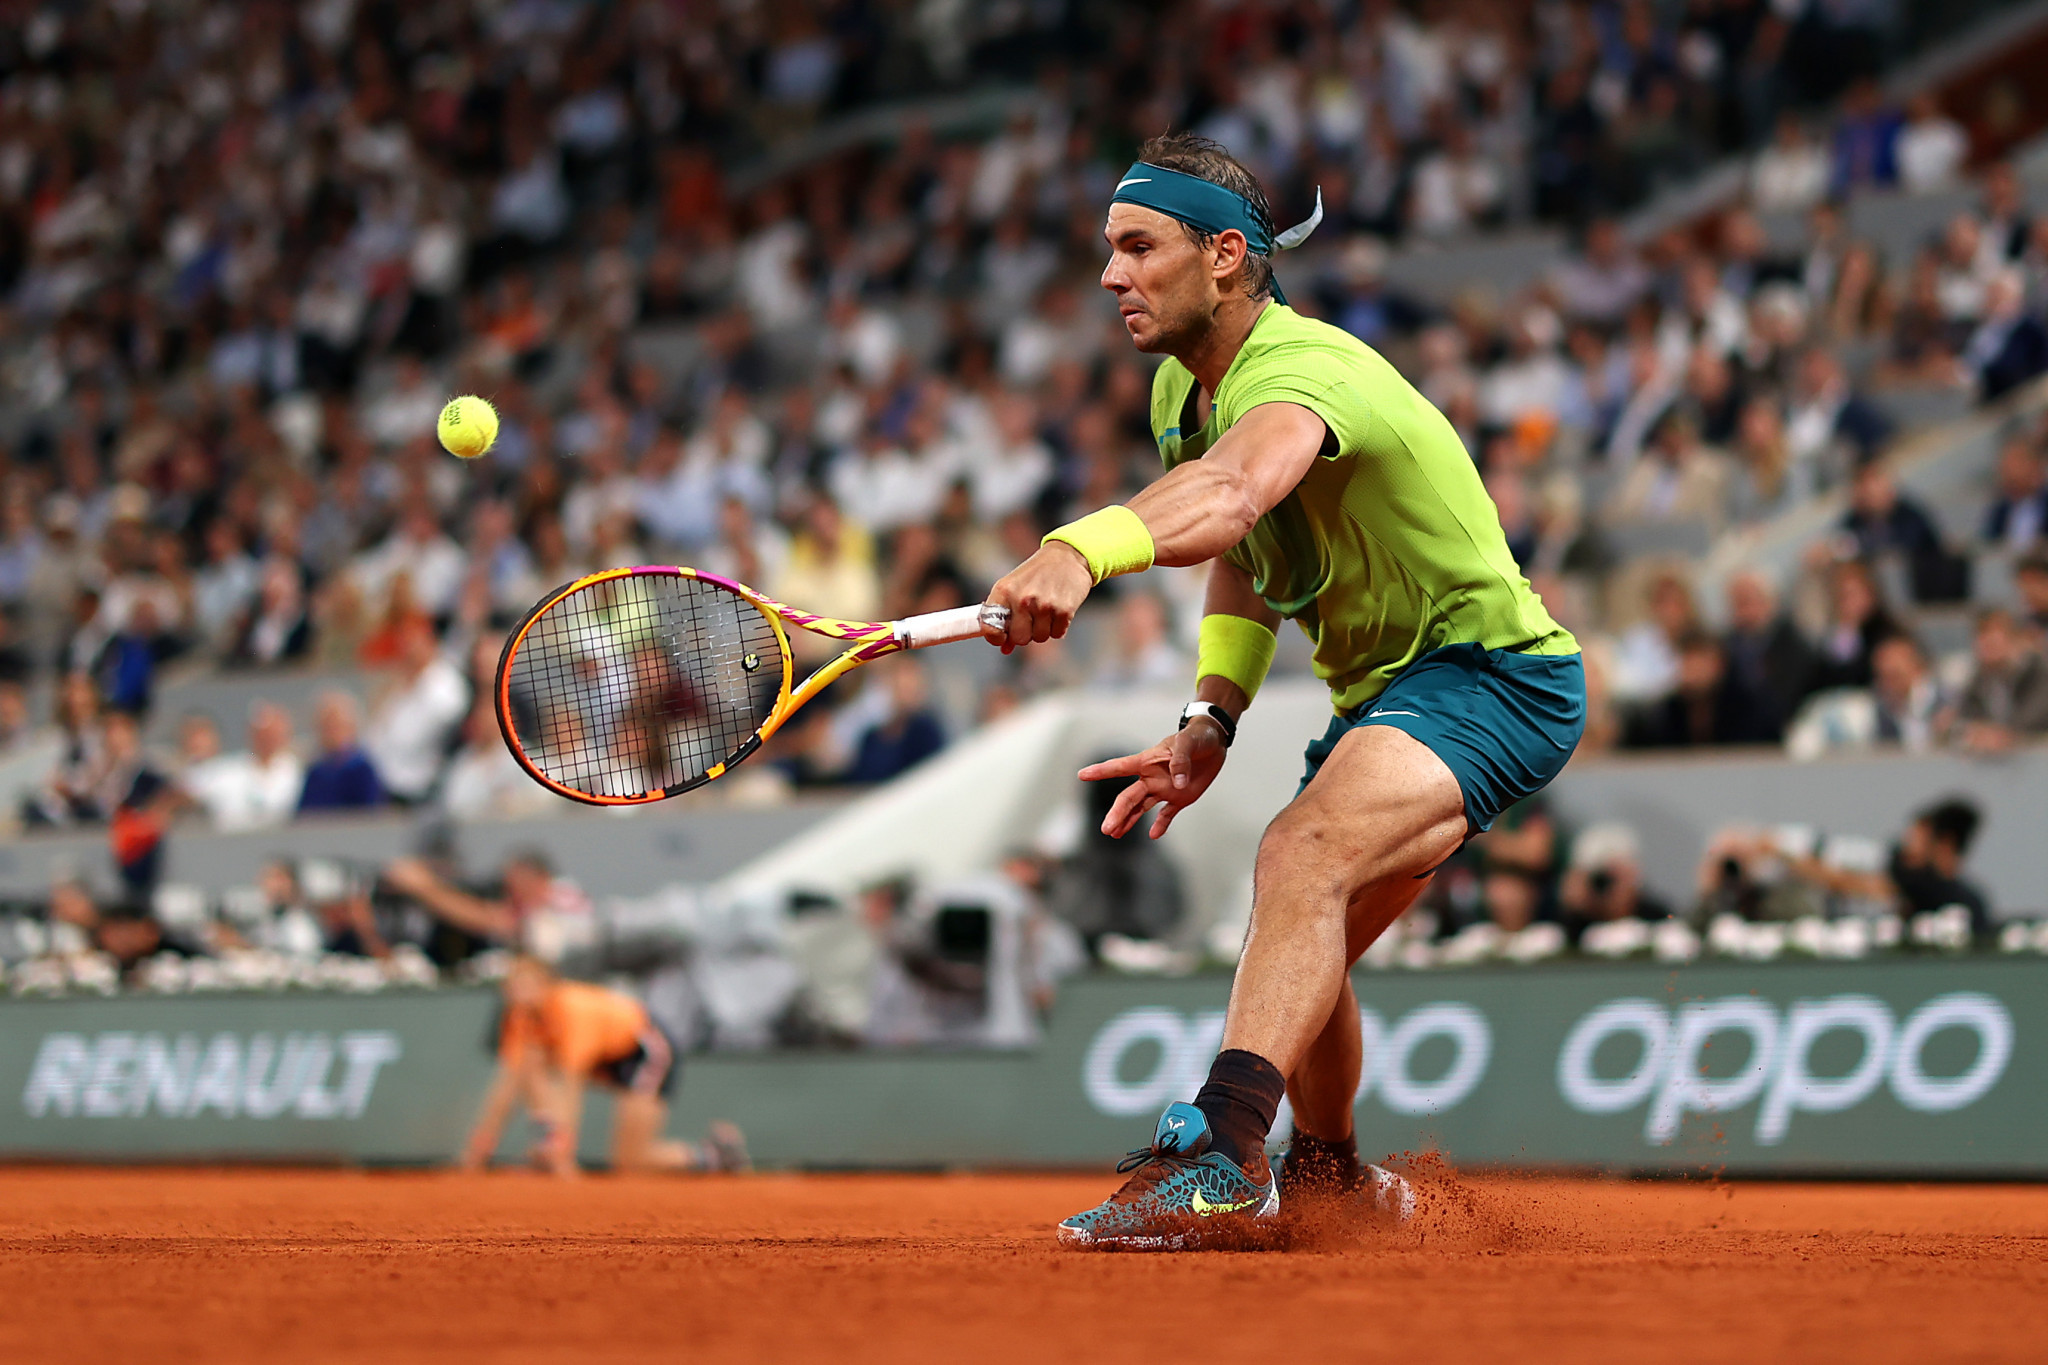 Spain's Rafael Nadal reached his 14th French Open final today ©Getty Images